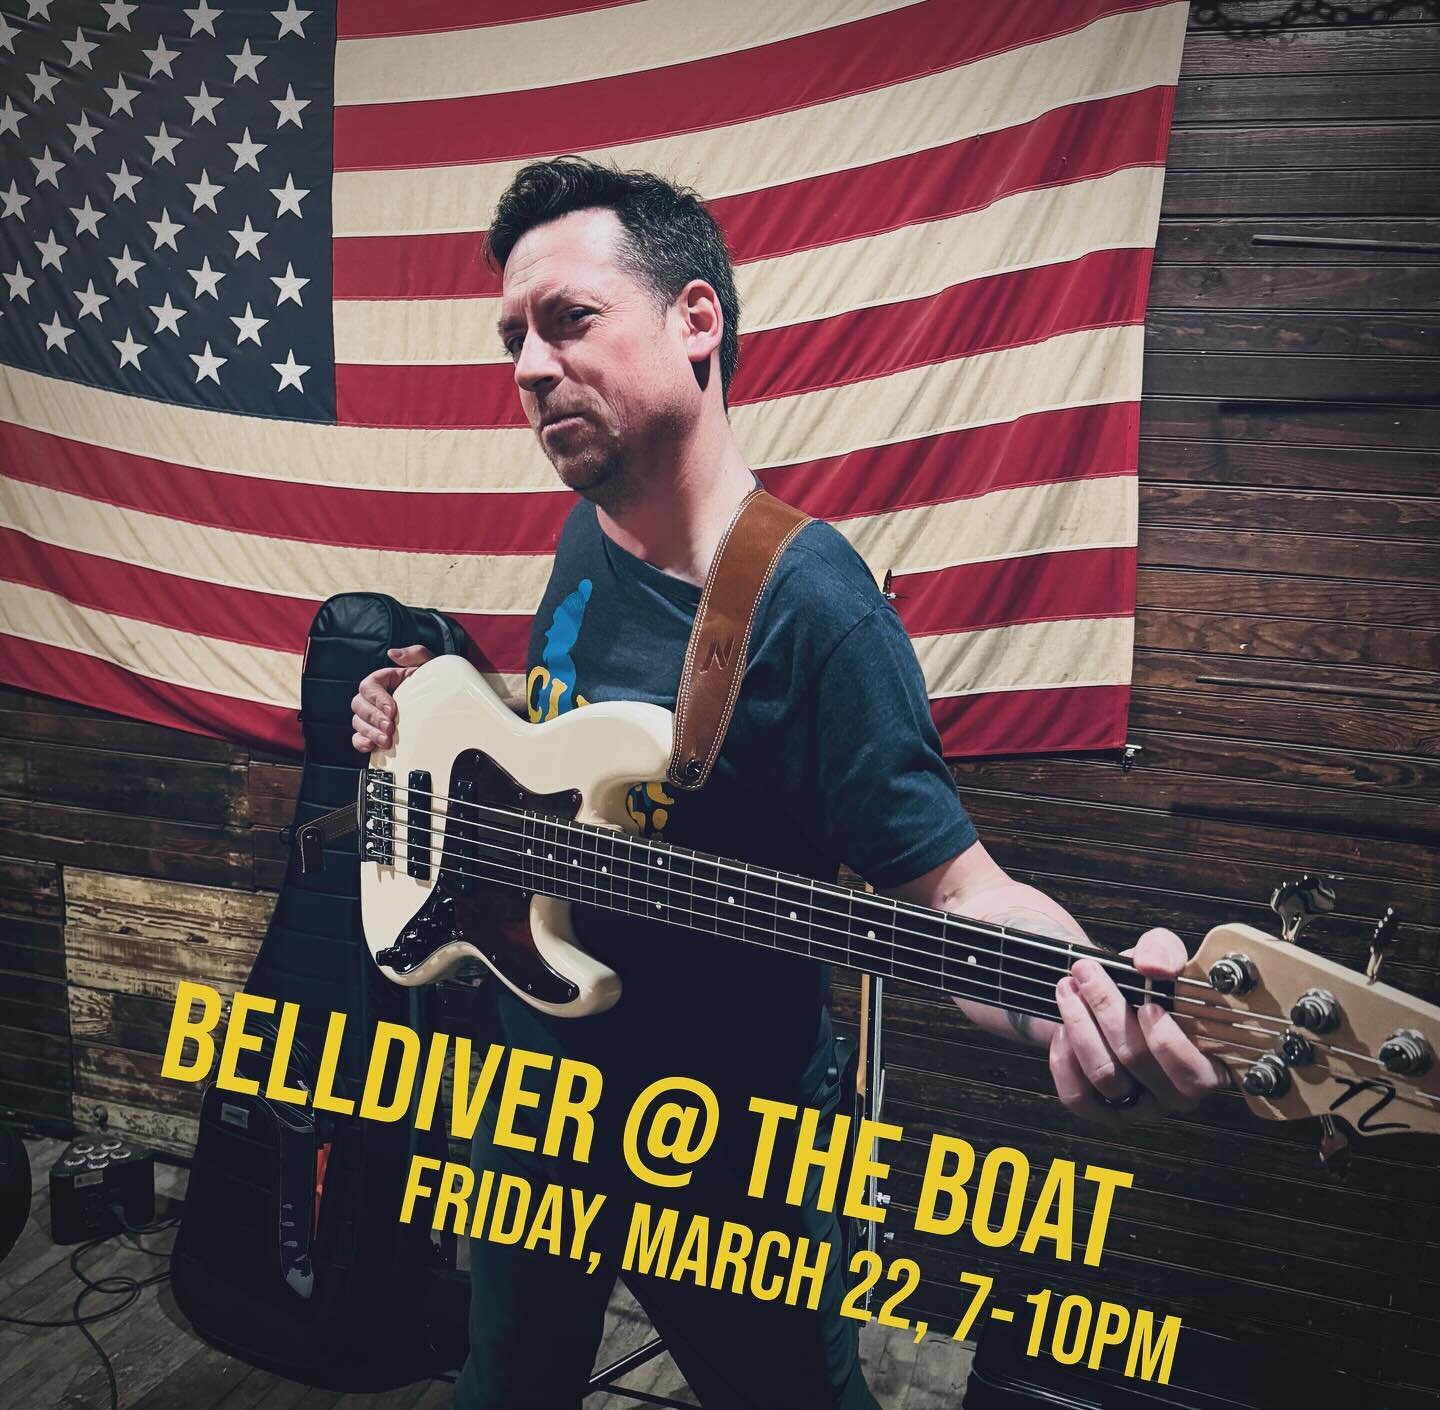 Ahoy from Belldiver! We are thrilled to be starting a monthly run of shows at @theboatatx beginning this Friday at 7pm. Look for us every Fourth Friday from now through July up in North Austin. Can&rsquo;t wait to see you out there for music, beer, a